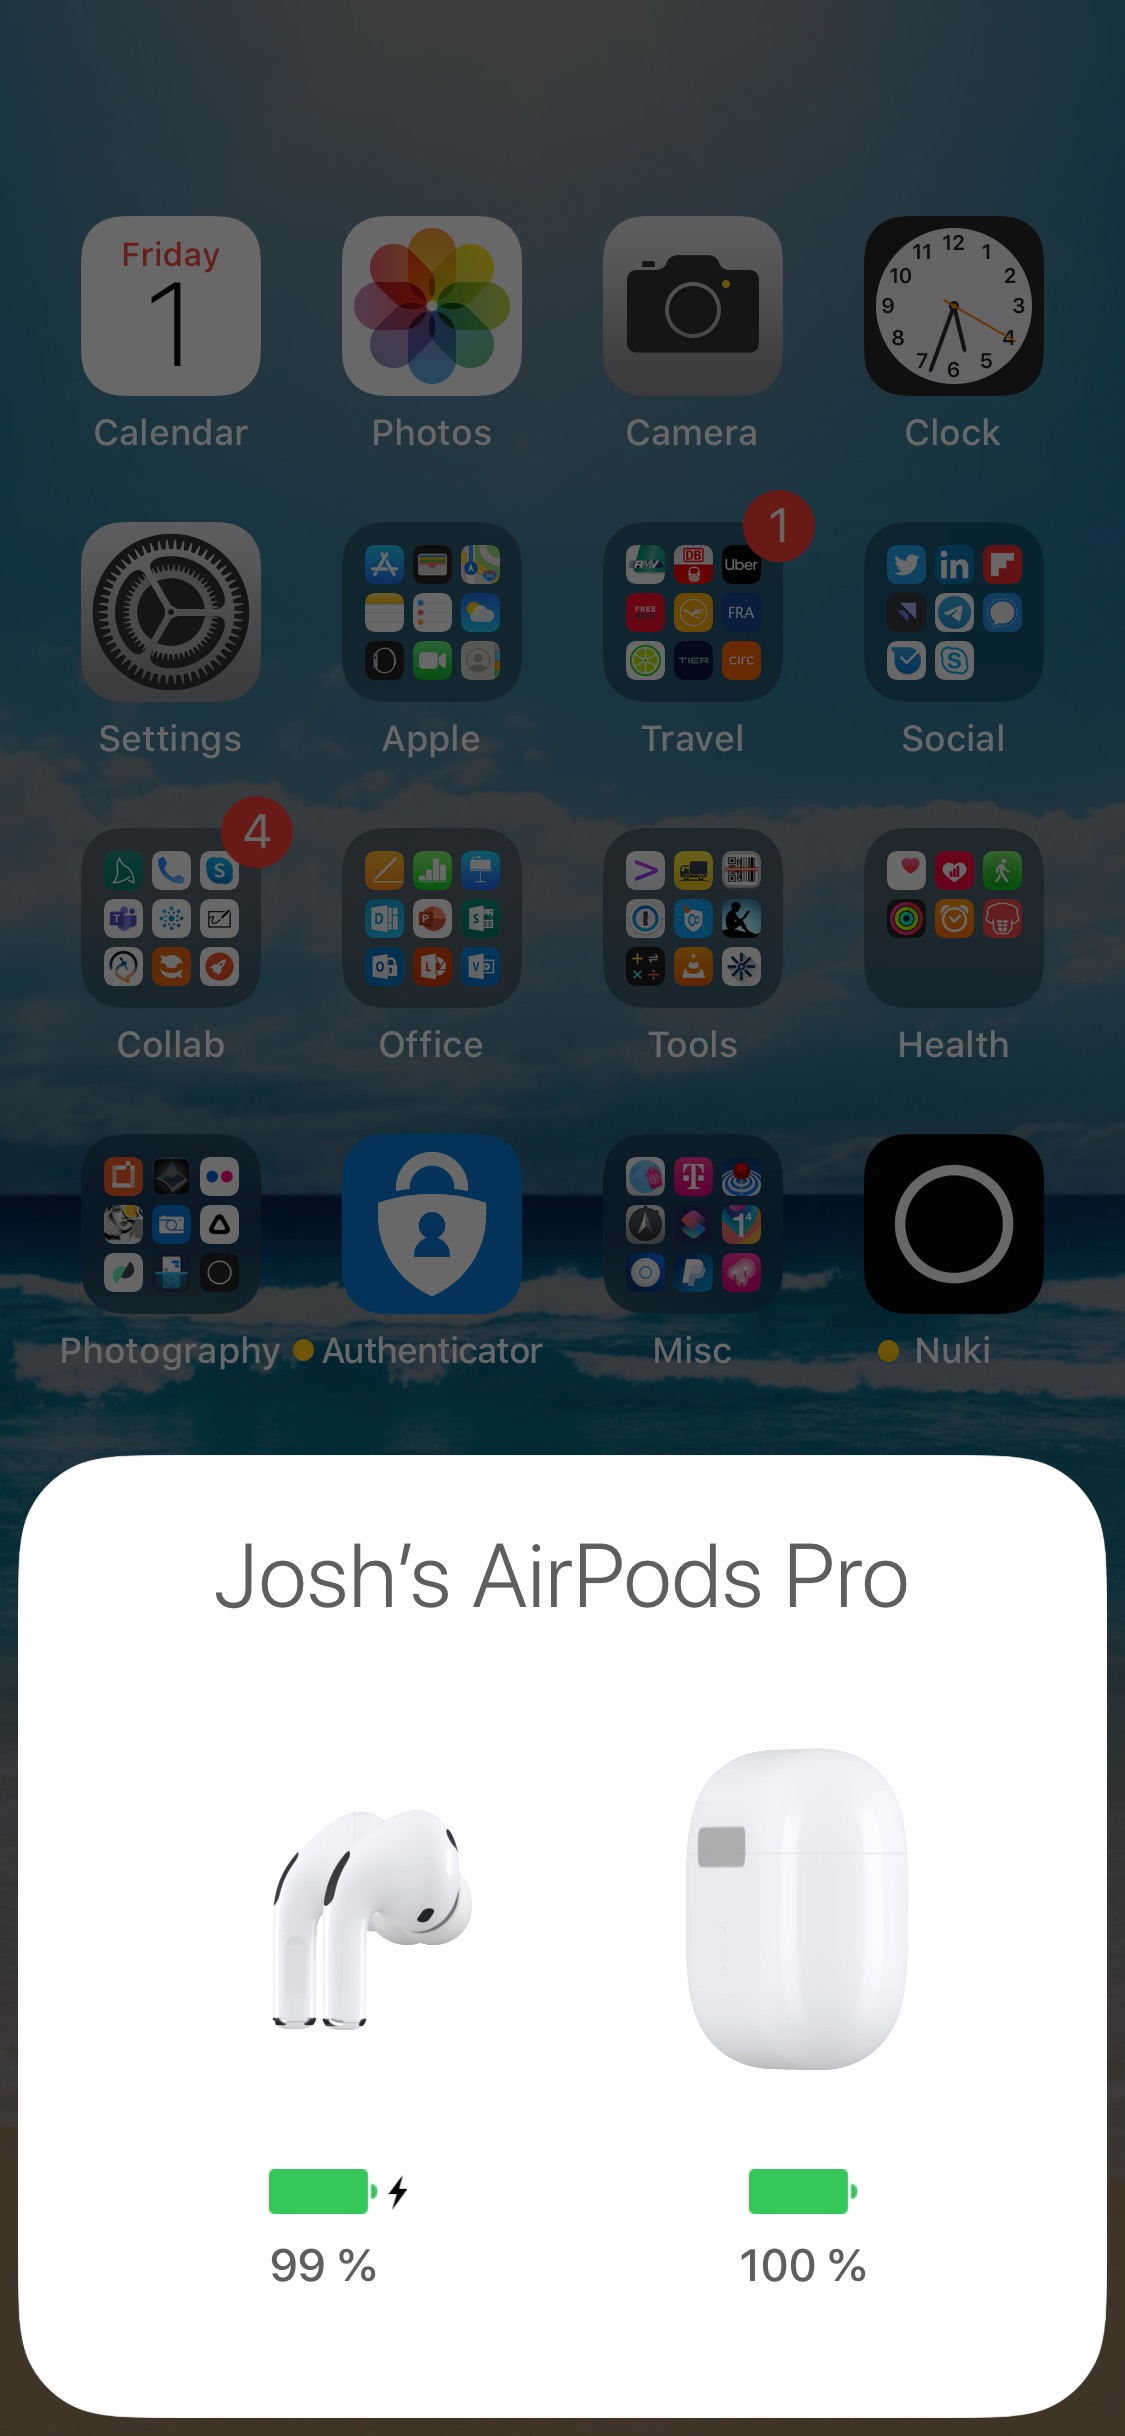 Connect the AirPods Pro